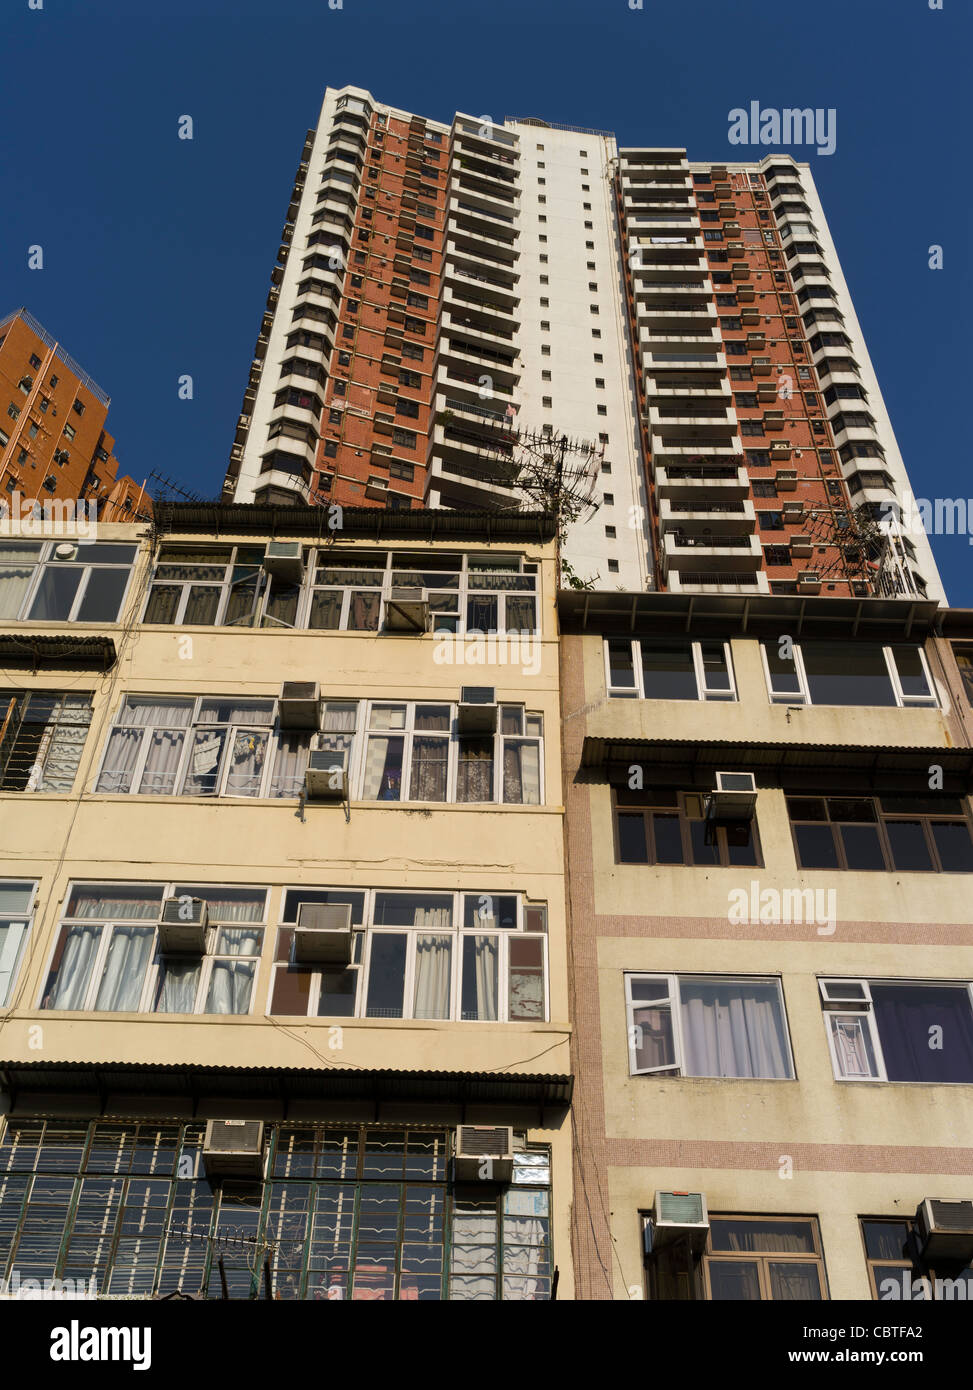 dh Chinese buildings CAUSEWAY BAY HONG KONG Old New high rise residential tower block flats china building flat houses Stock Photo